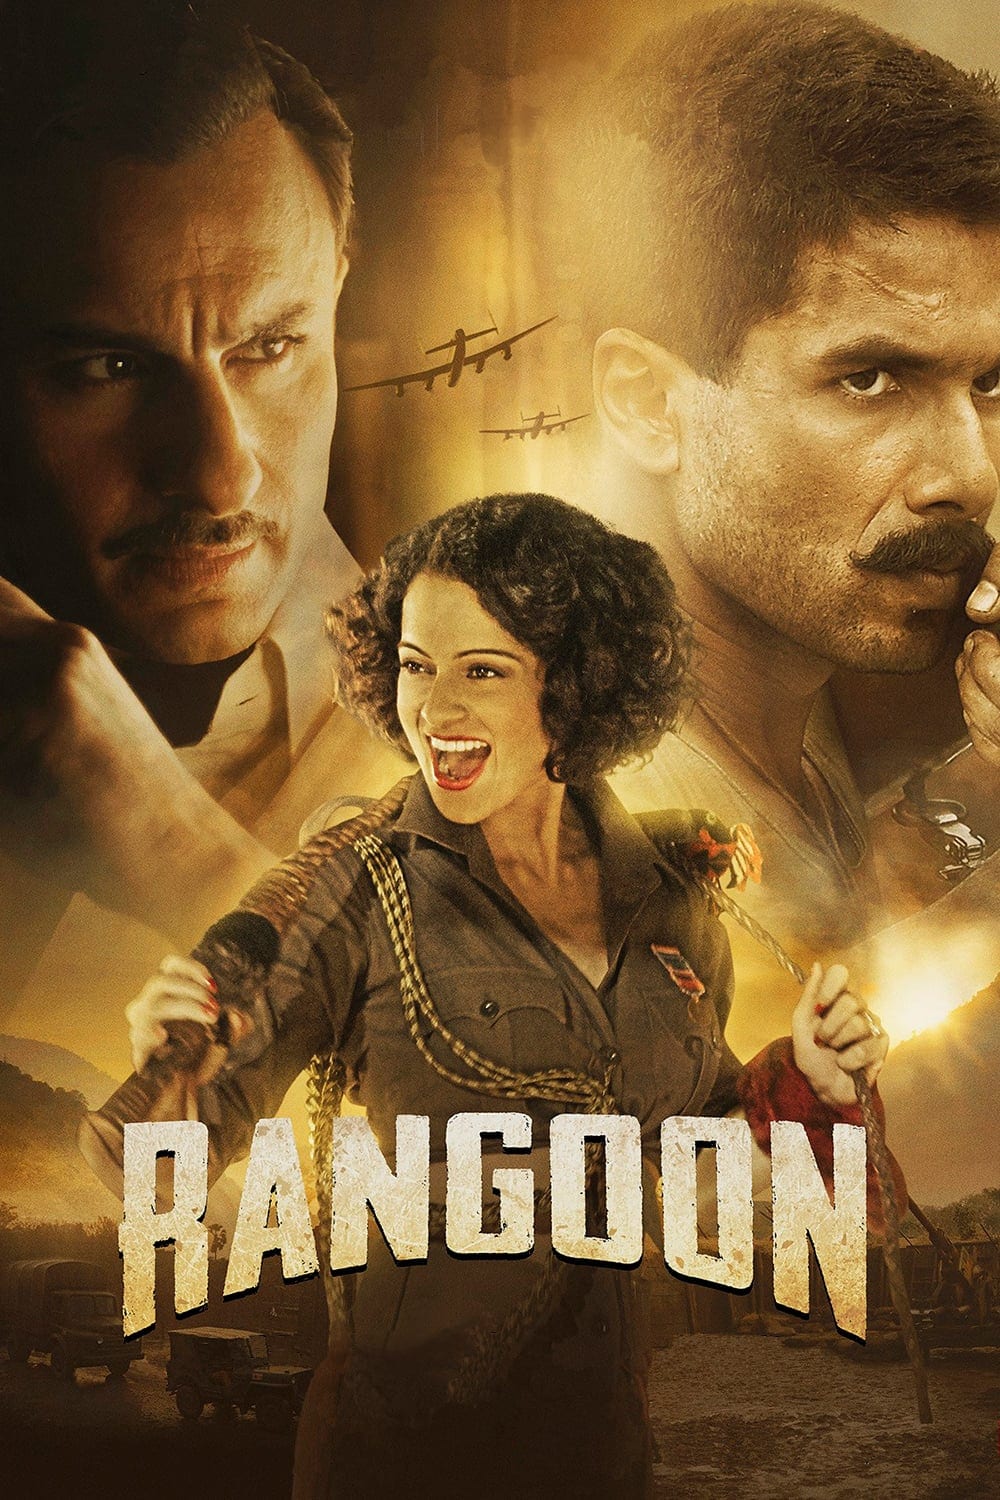 Poster for the movie "Rangoon"